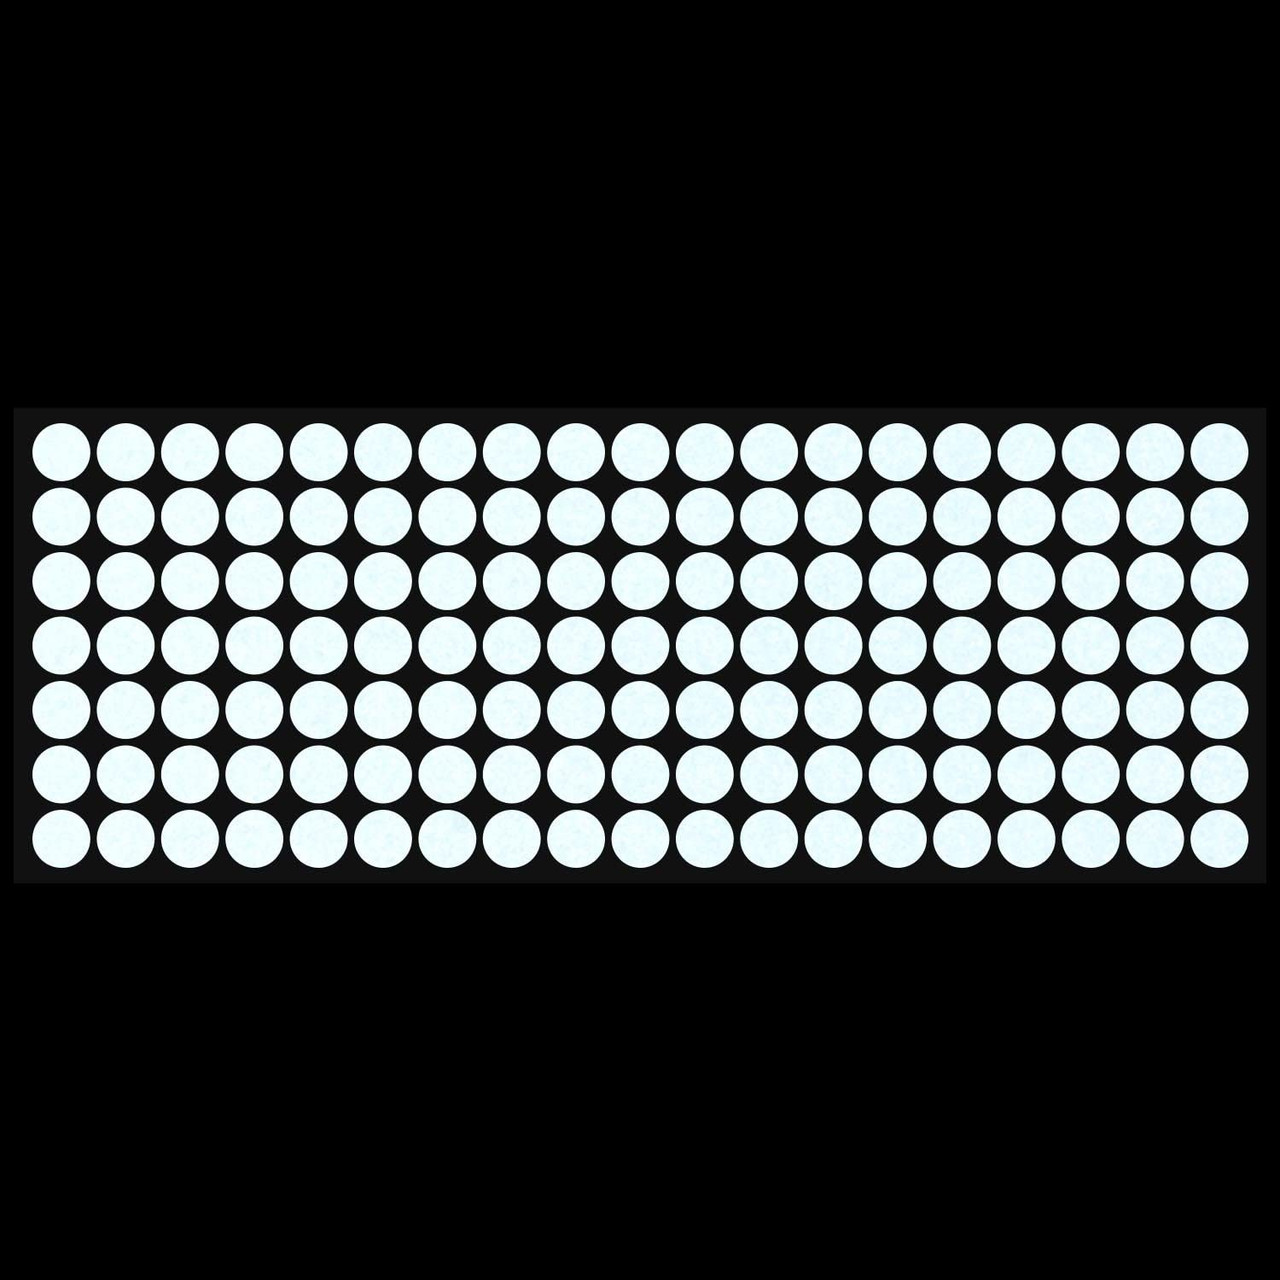 LiteMark 1/2 inch white reflective dots reflecting- Pack of 133